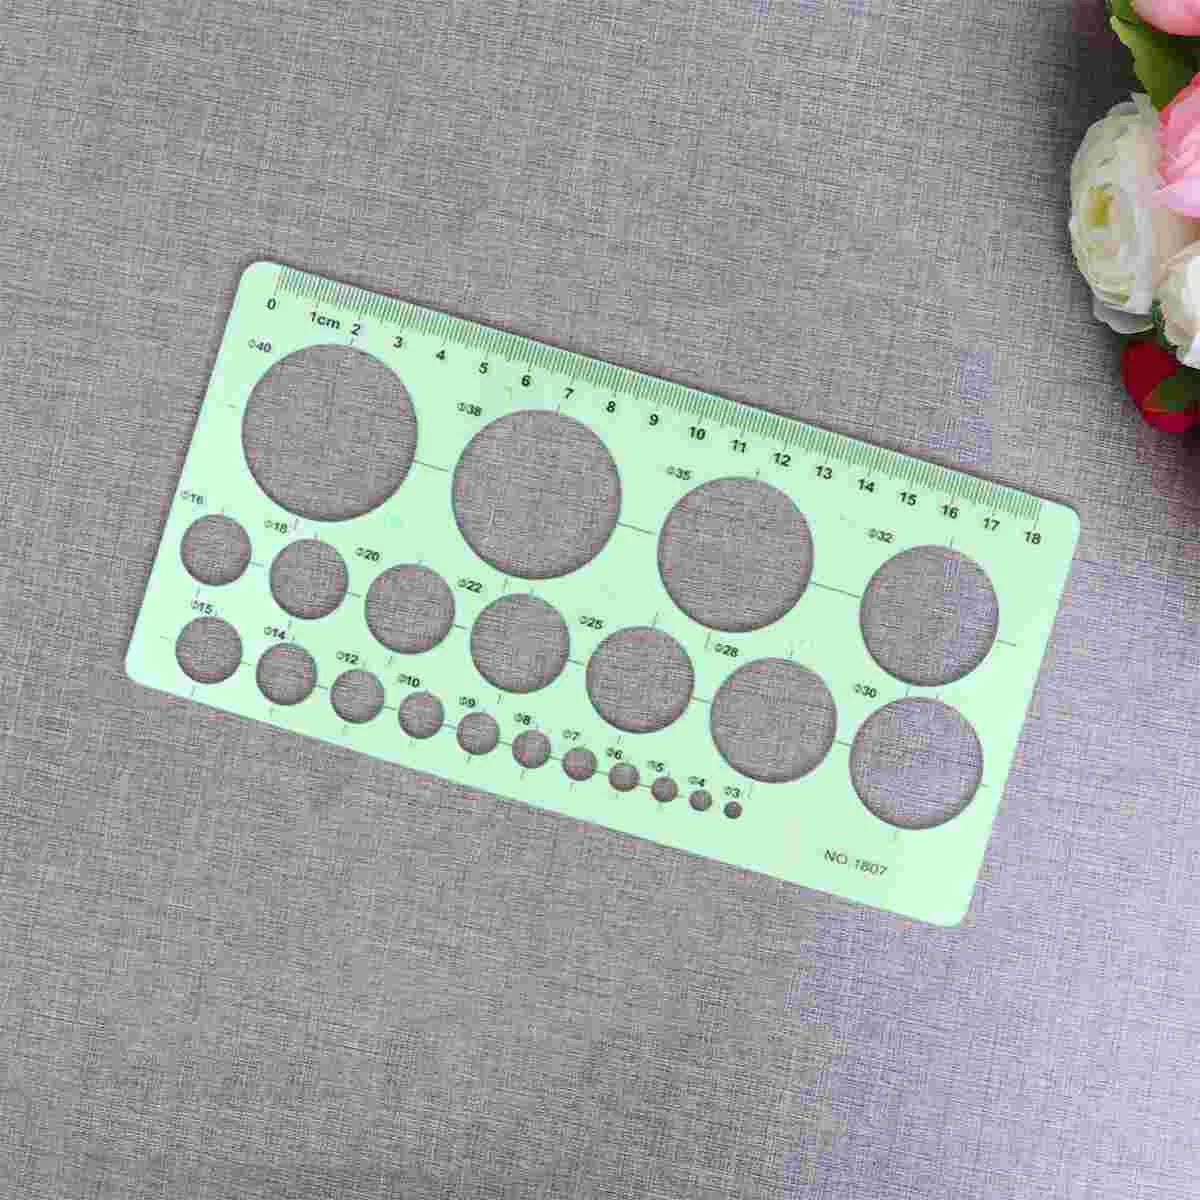 

Circle Templates Drawing Measuring Tool Template Stencil Drawings Rulers Architecture Shapes Buliding Geometric Maker Kit Oval